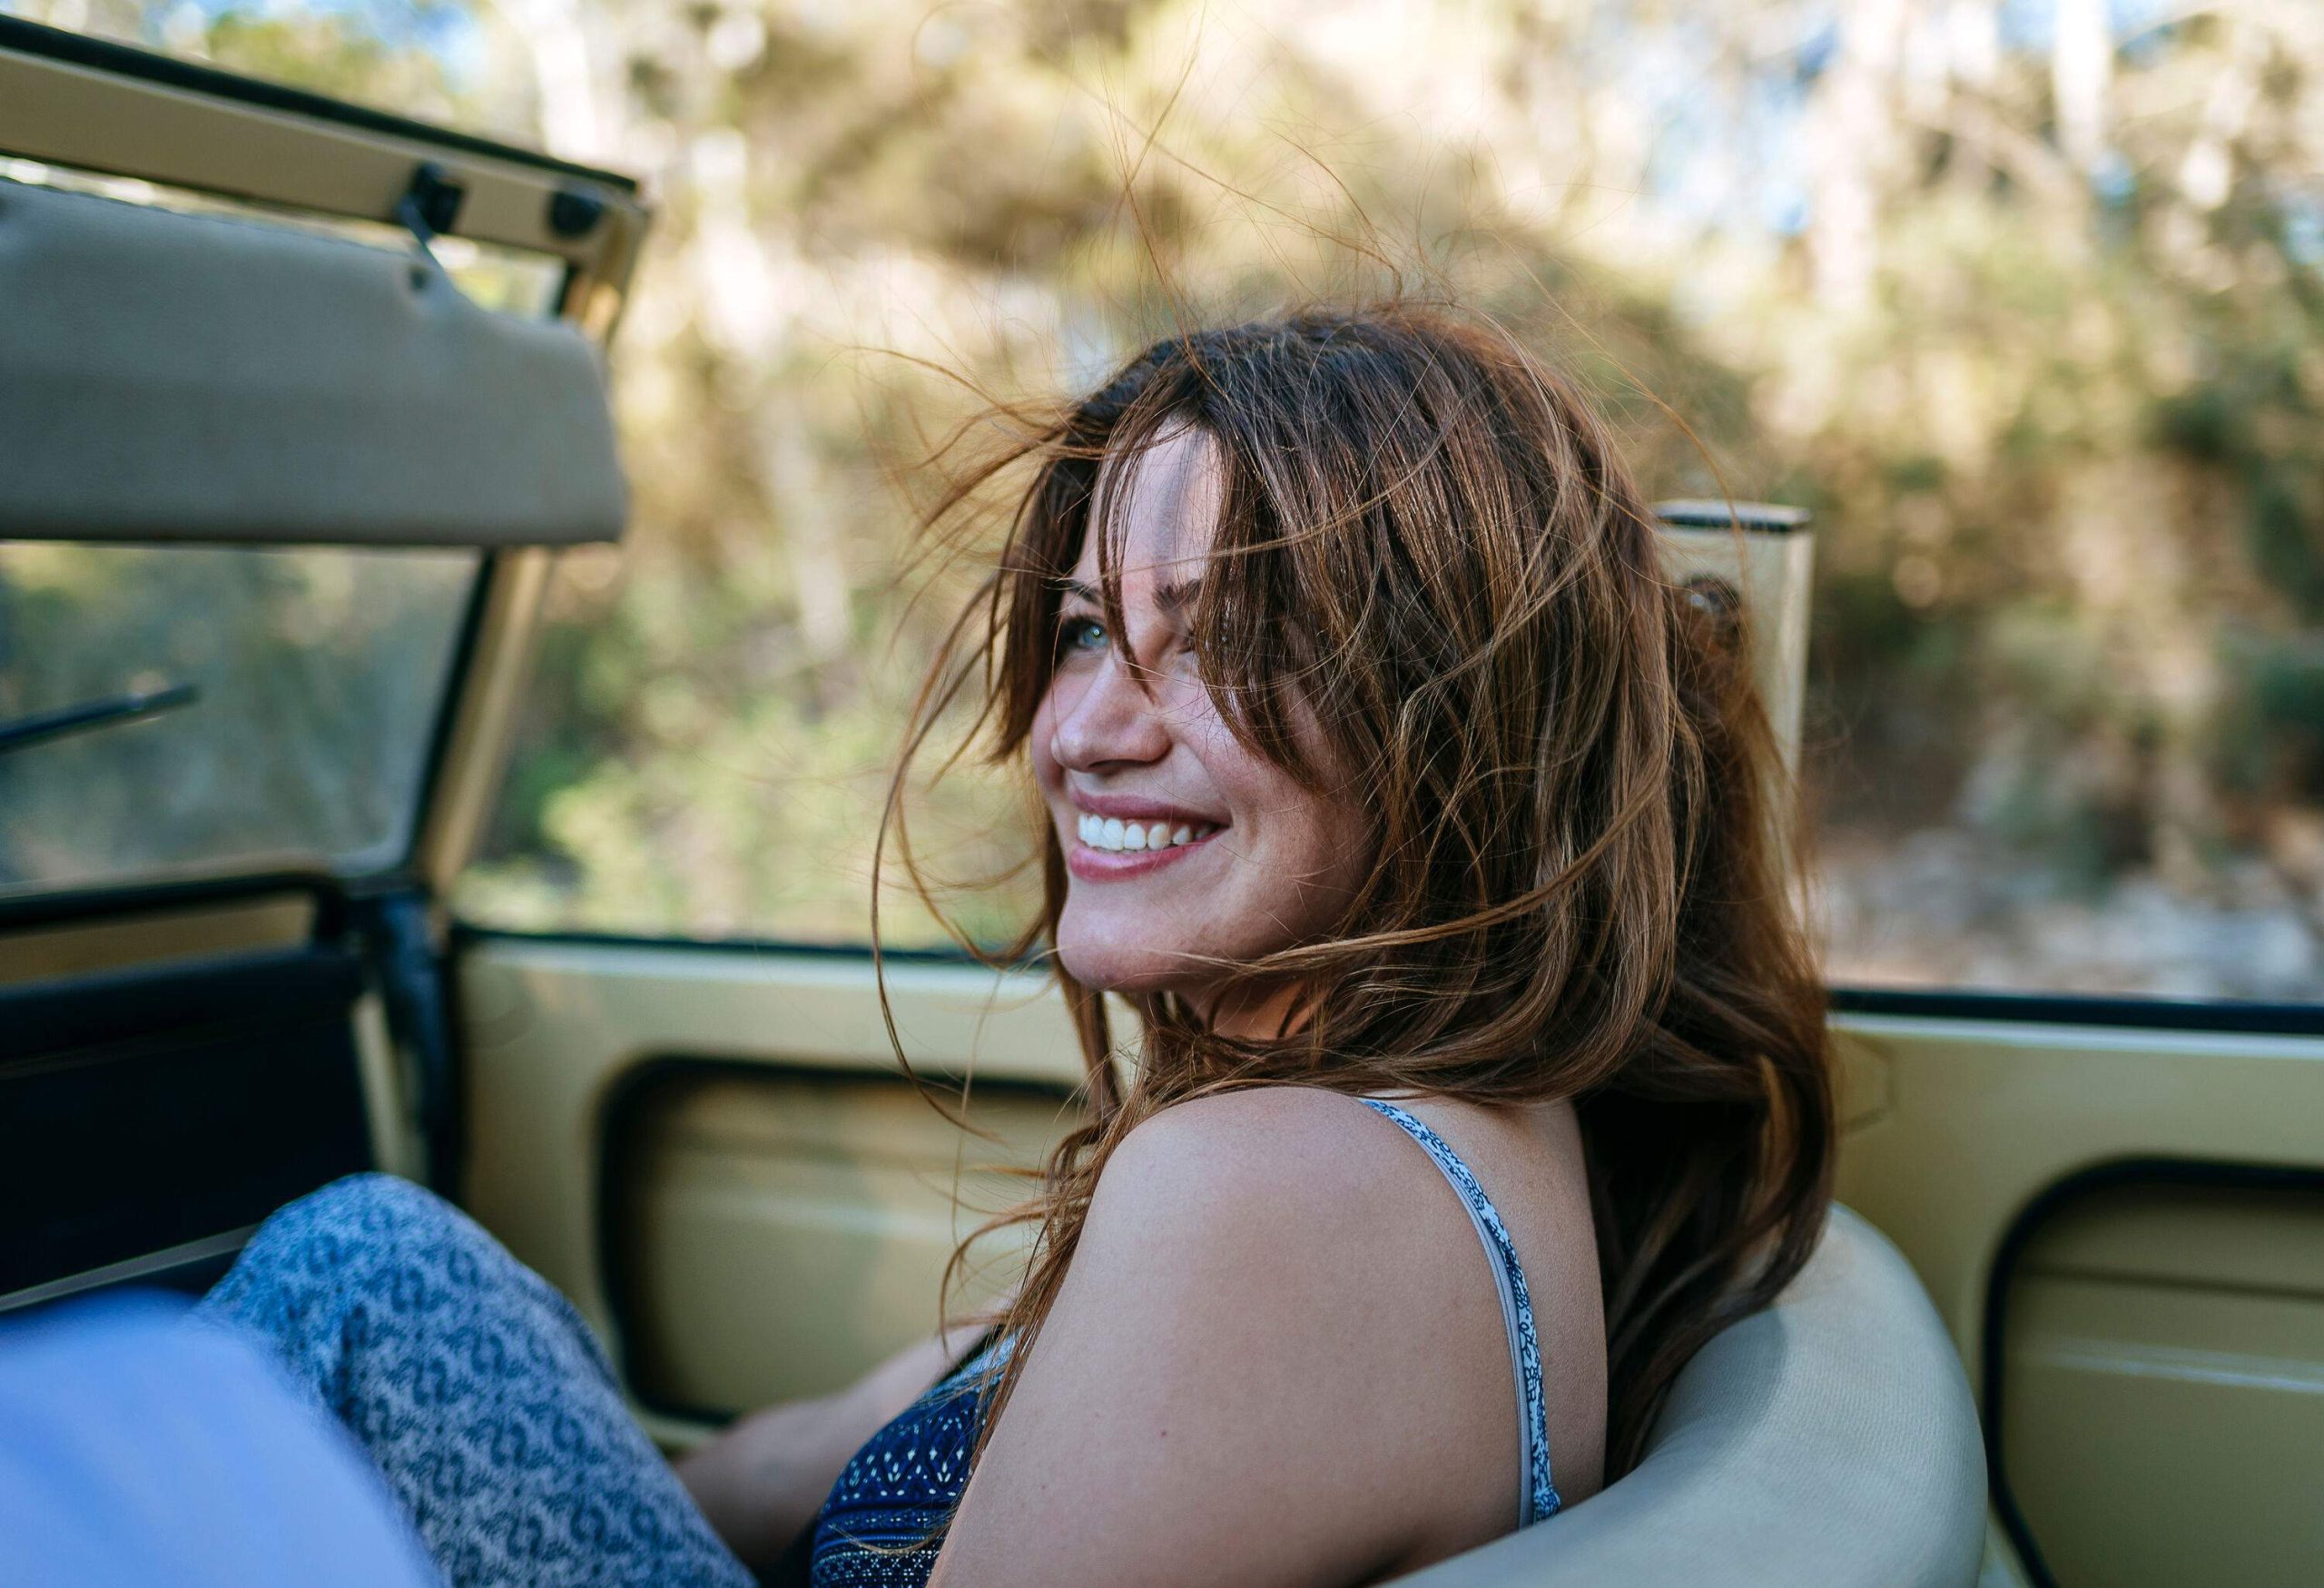 A smiling woman sitting in a convertible car with open roof.